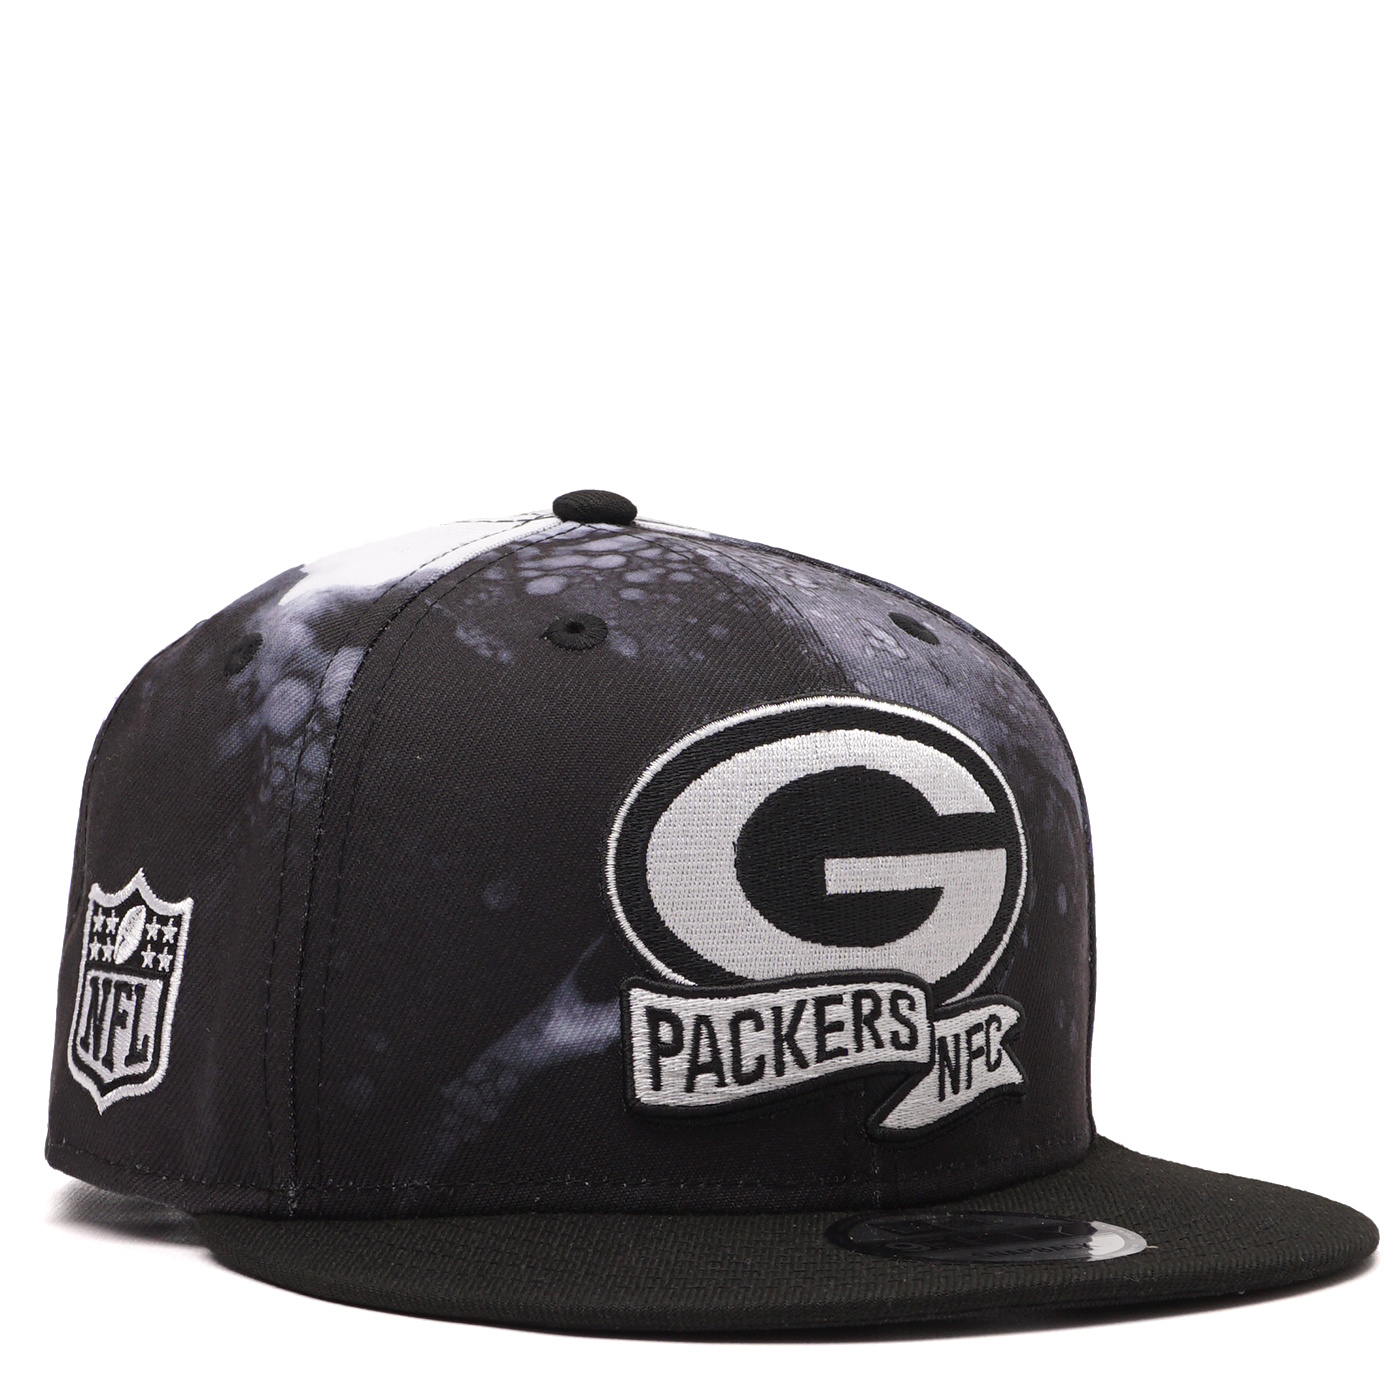 GREEN BAY PACKERS SIDELINE 9FIFTY SNAPBACK - BLACK/ WHITE INK